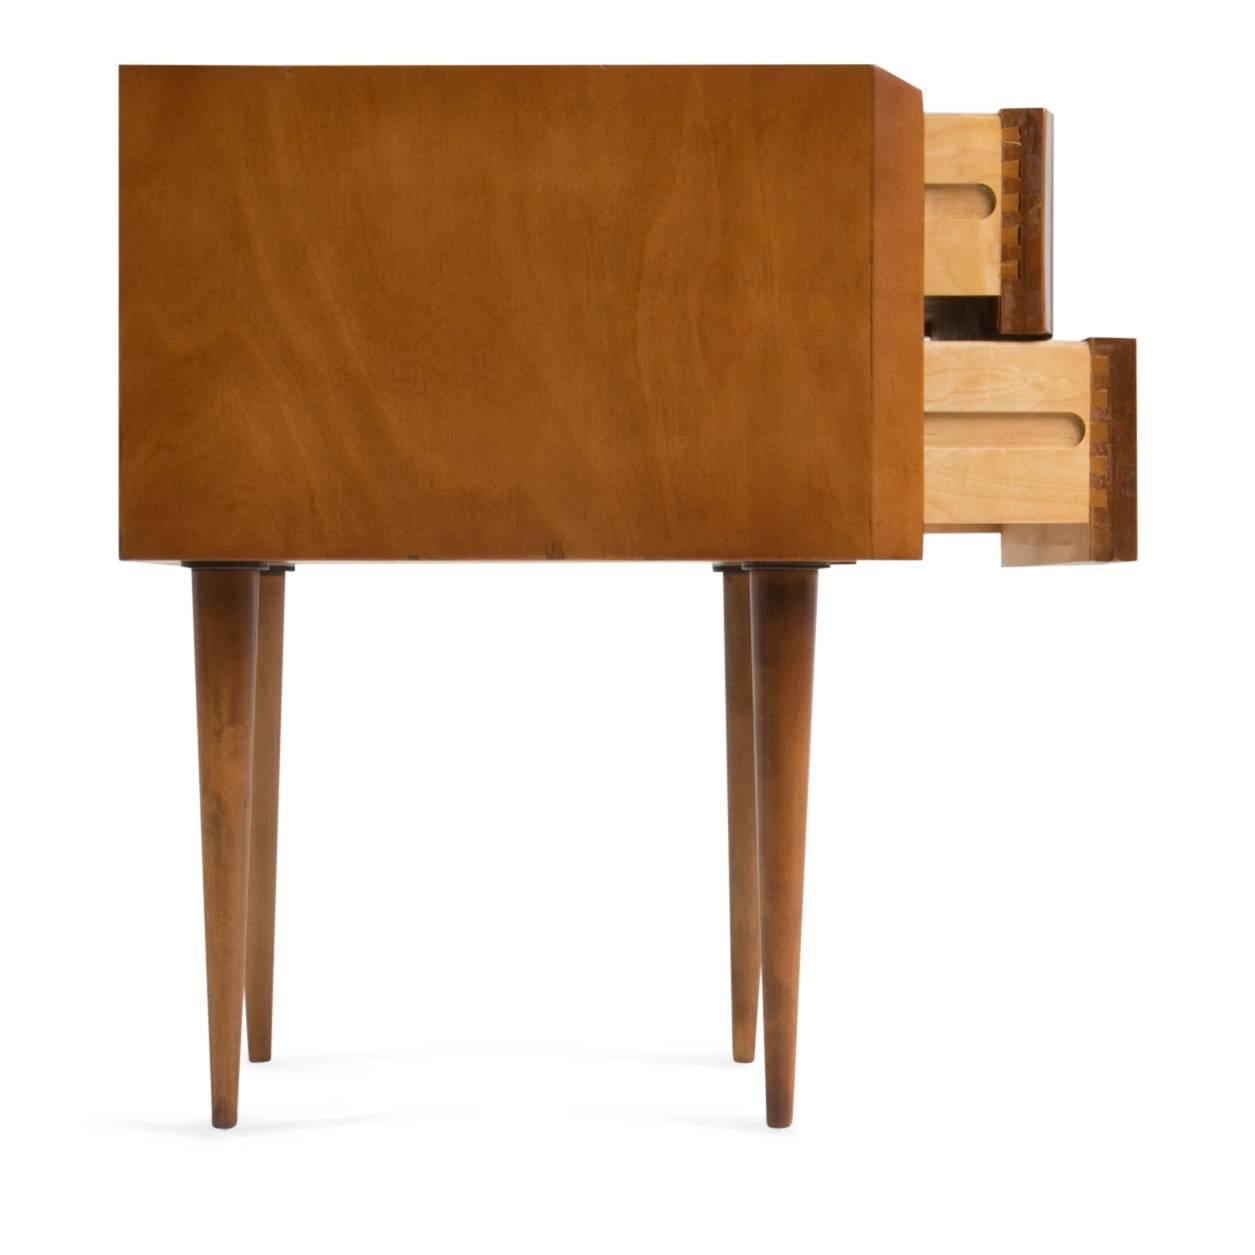 Mid-20th Century Edmond Spence Wave Front Nightstands, Stamped, circa 1950